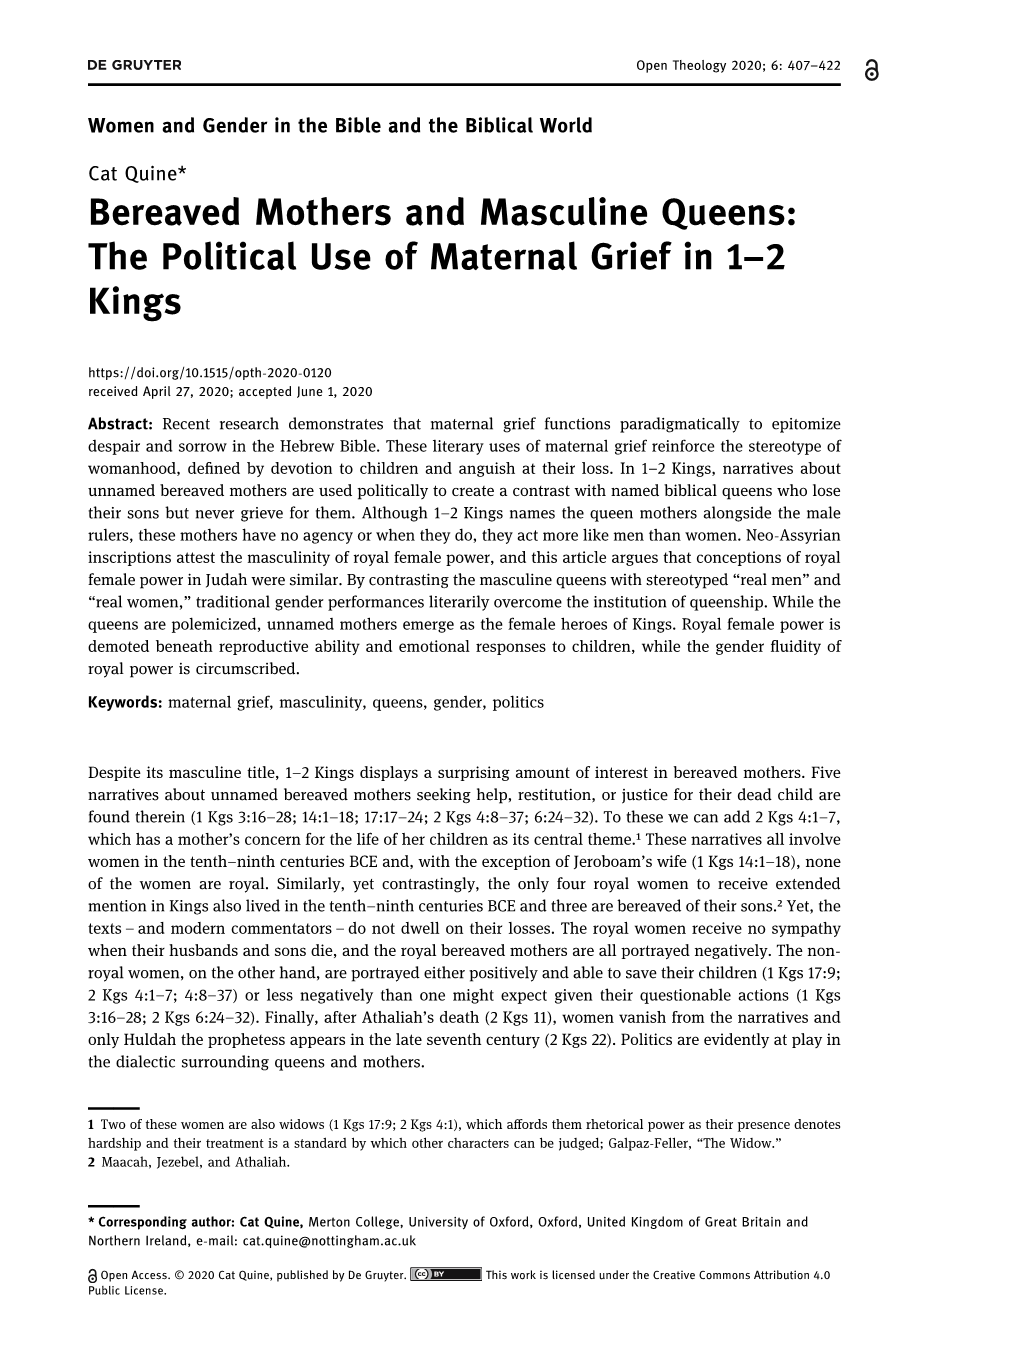 Bereaved Mothers and Masculine Queens: the Political Use of Maternal Grief in 1–2 Kings